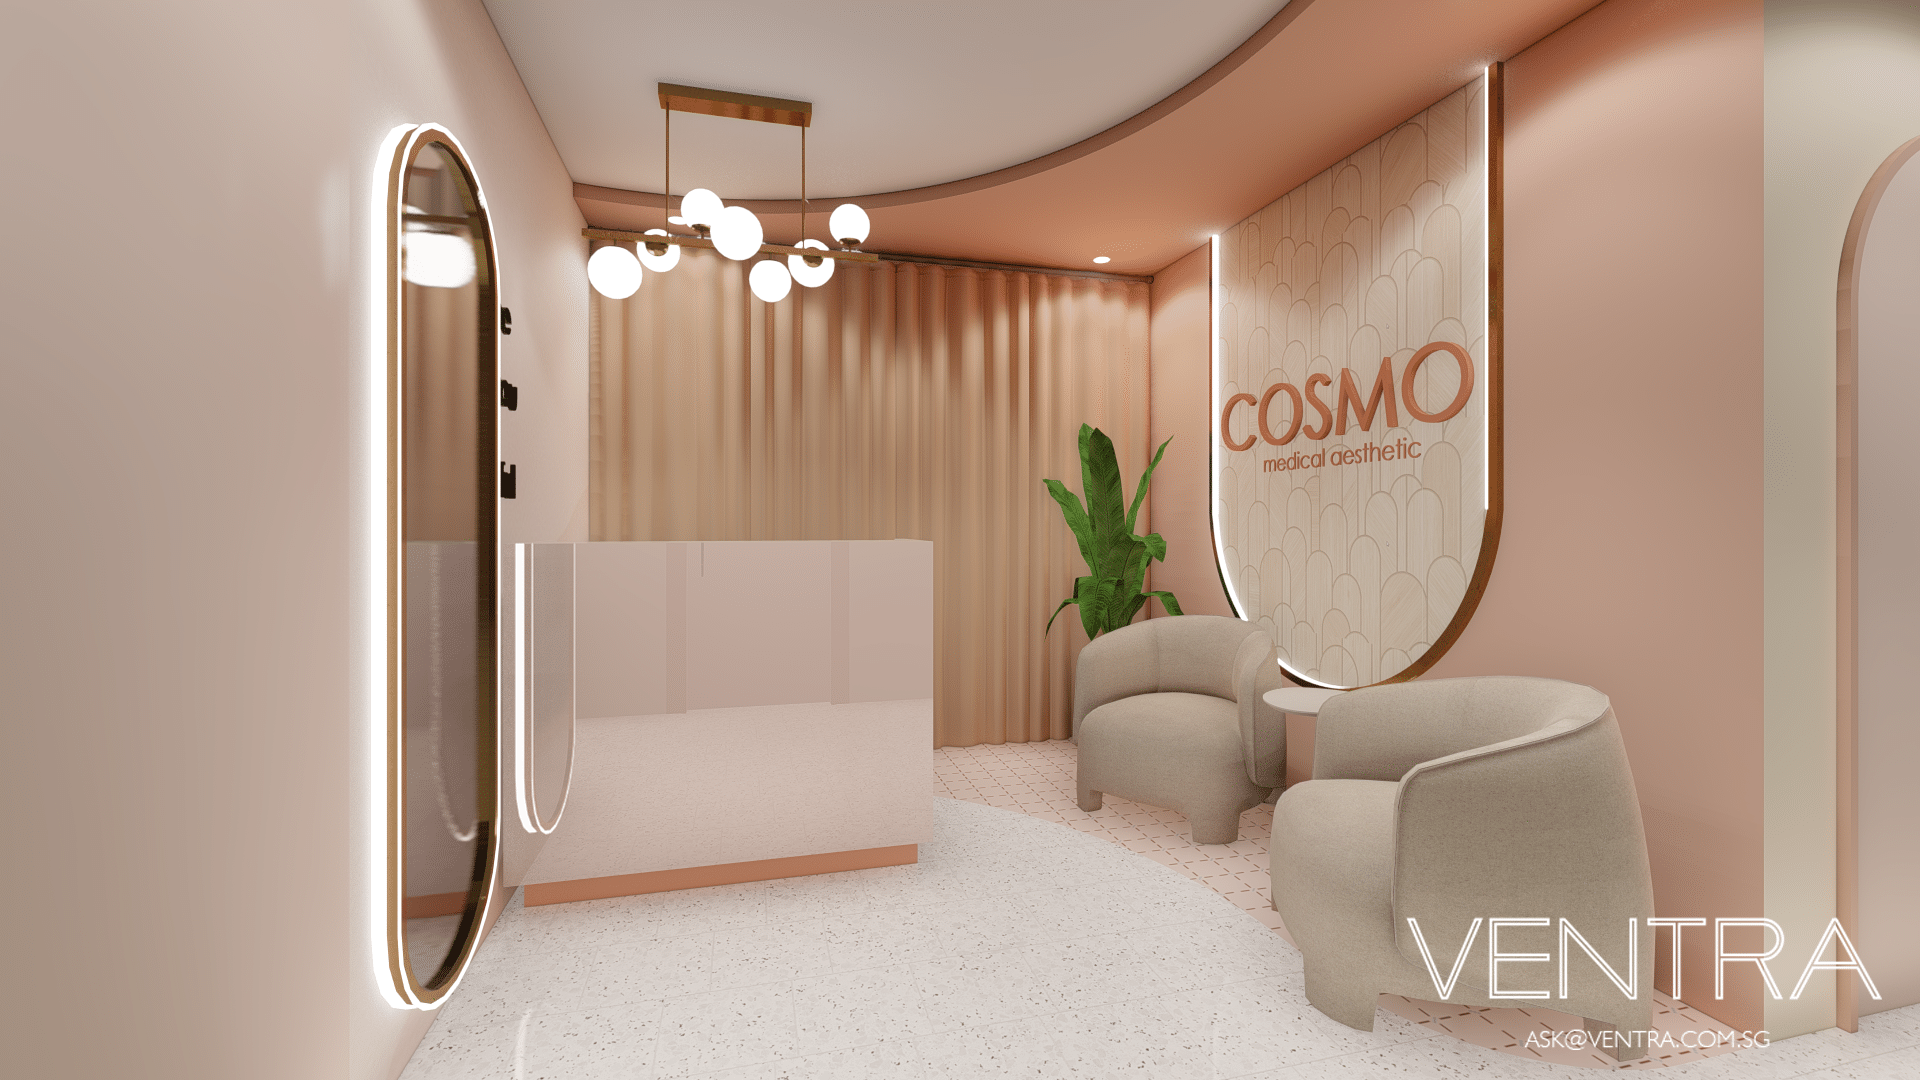 cosmo aesthetic medical spa clementi